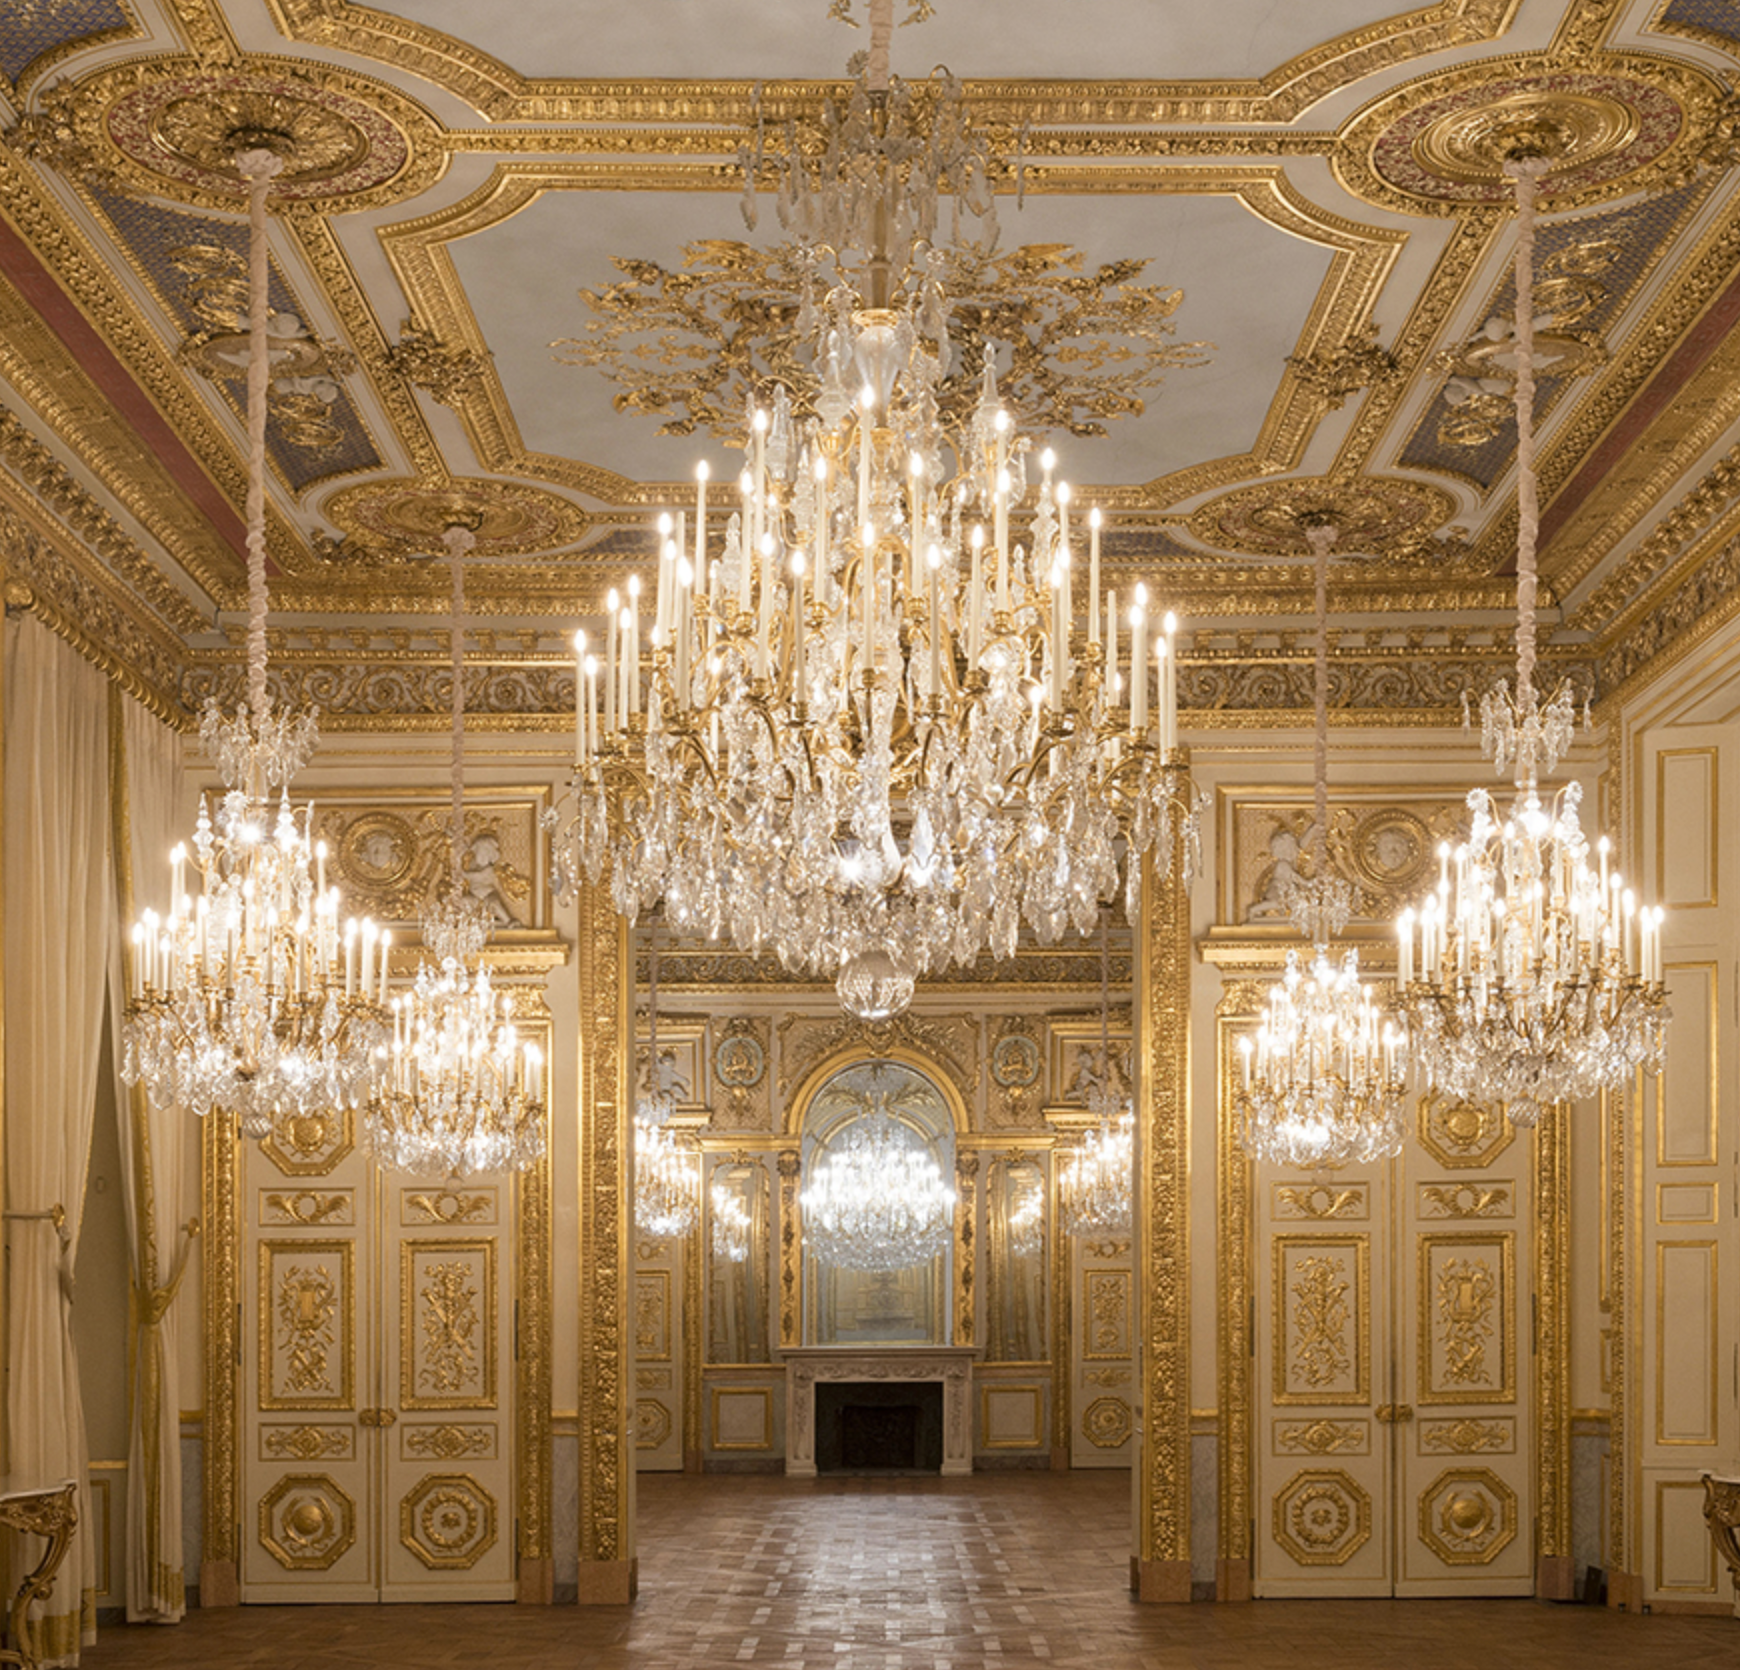 View of the gold and chandelier rooms in the Hotel de la Marine Paris.